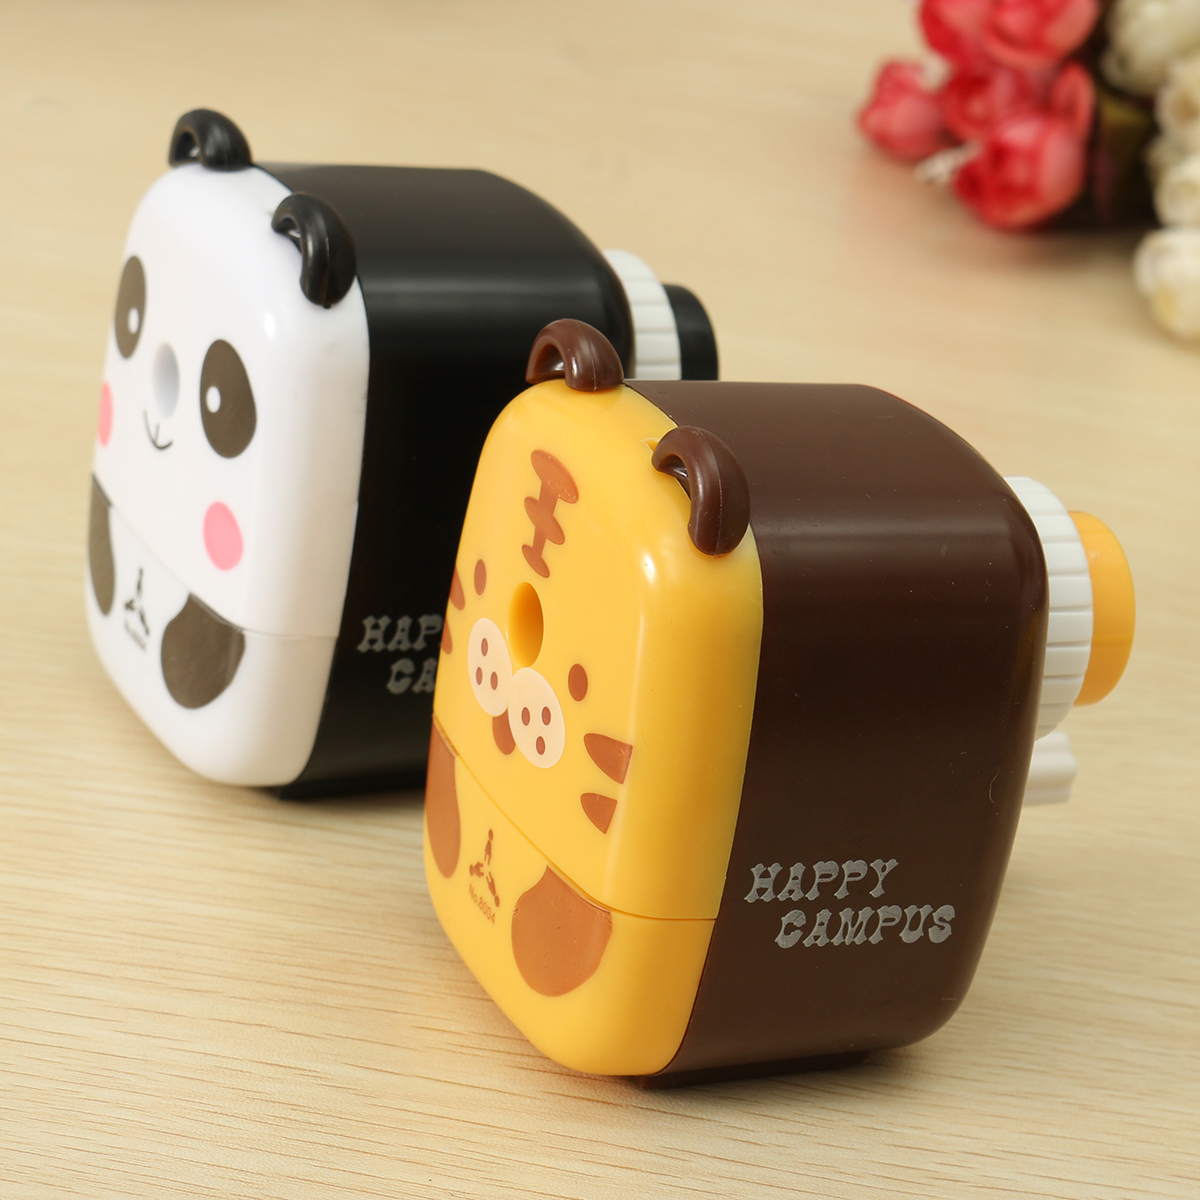 Practical Tiger Panda Animal Shaped Mini Manual Pencil Sharpener Gifts Office School Students Stationery Supplies—2